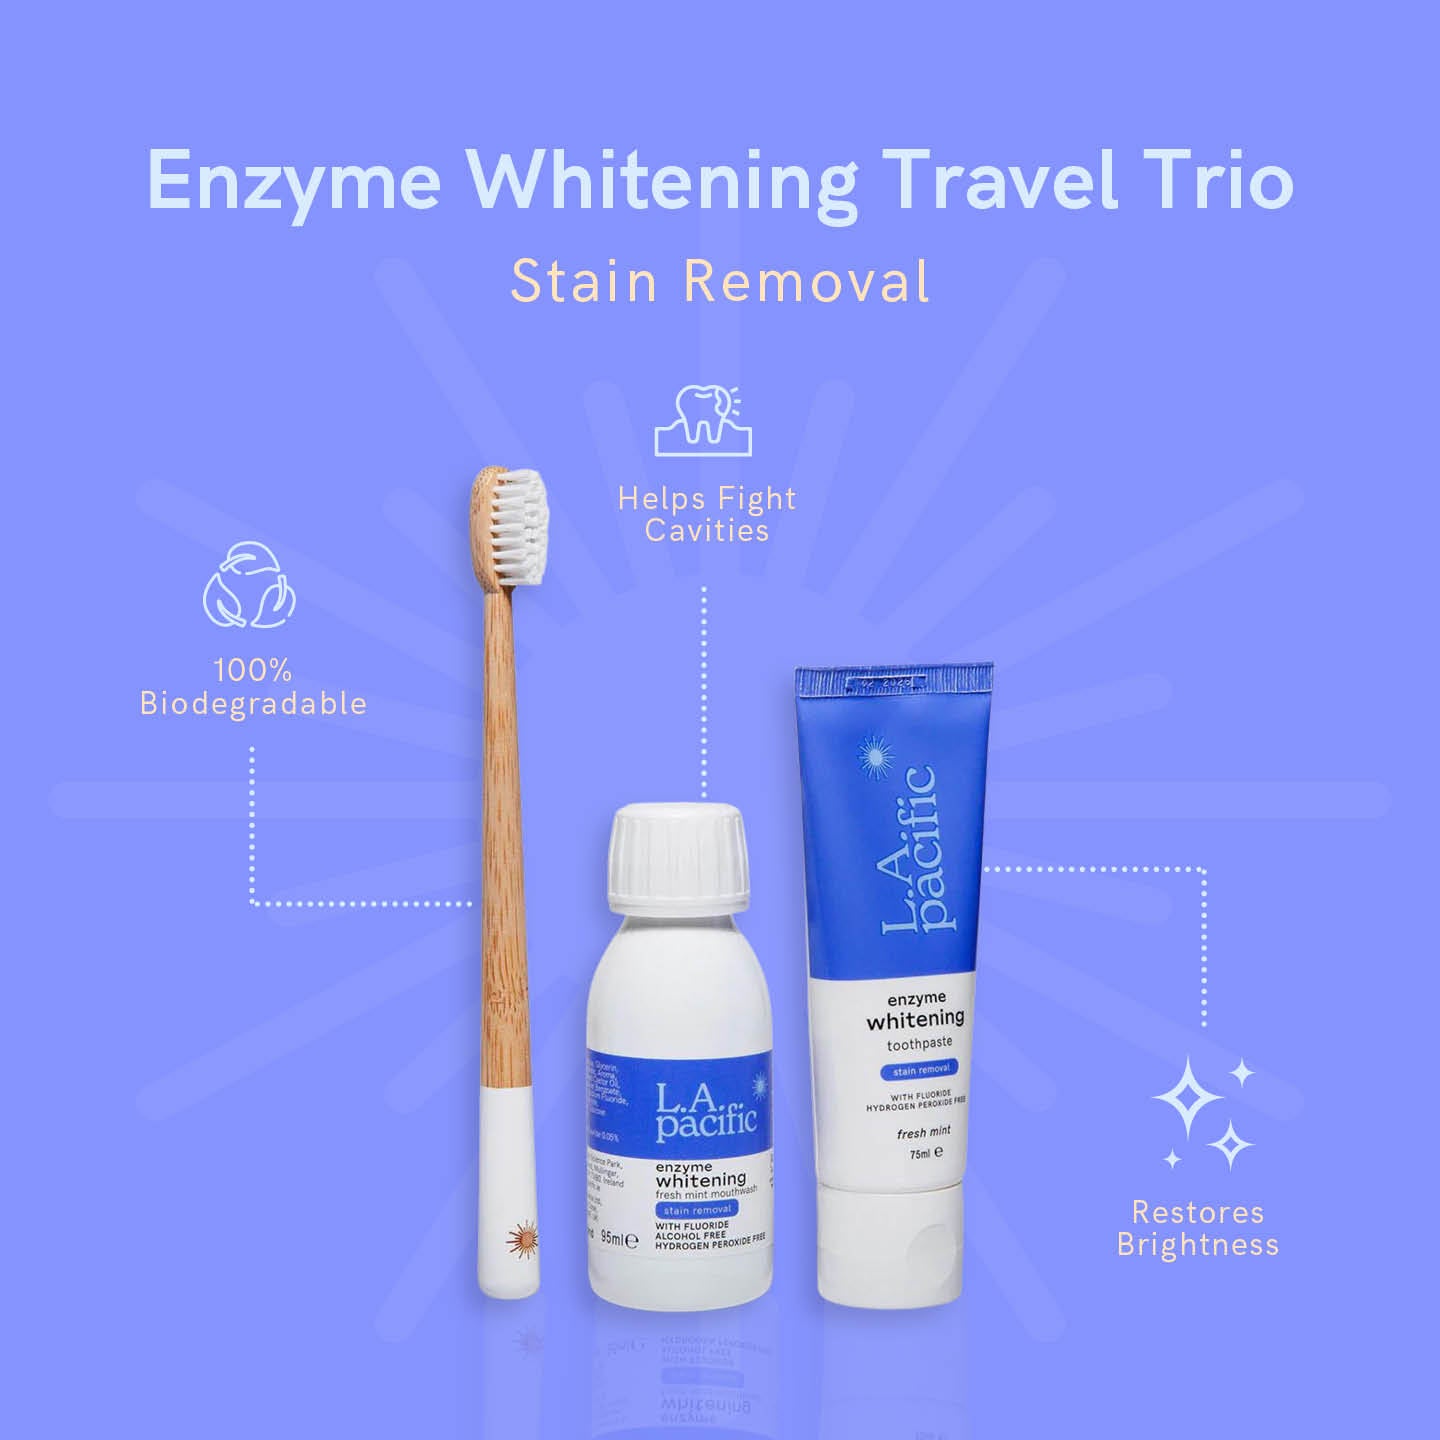 Enzyme Whitening Travel Trio - Stain Removal